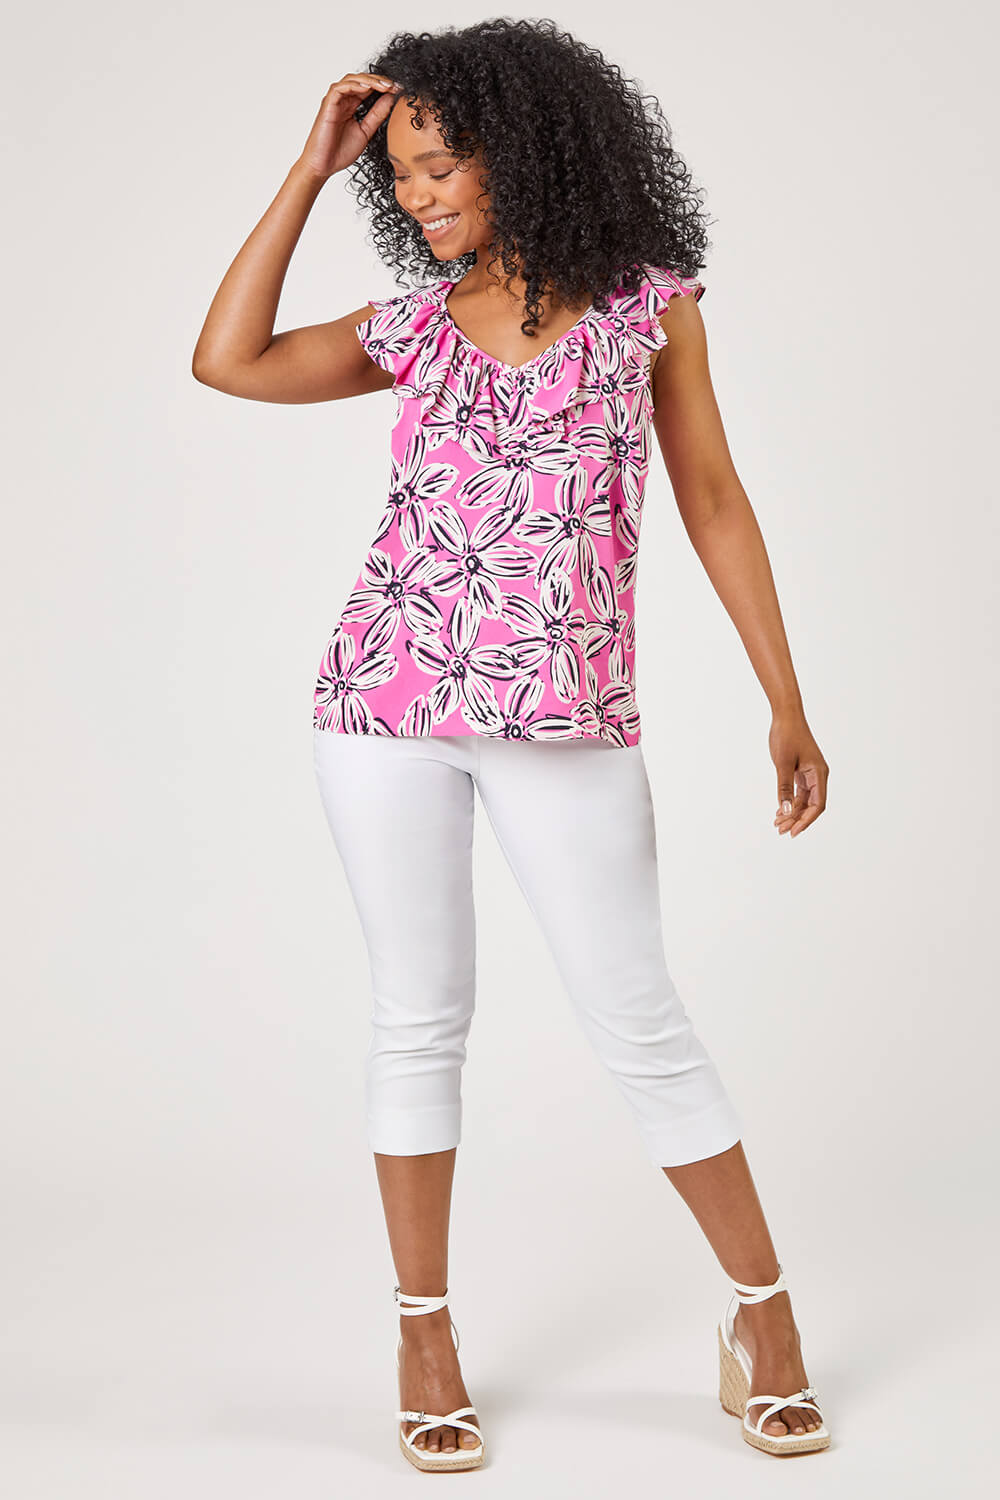 PINK Petite Floral Print Frill Detail Top, Image 3 of 6